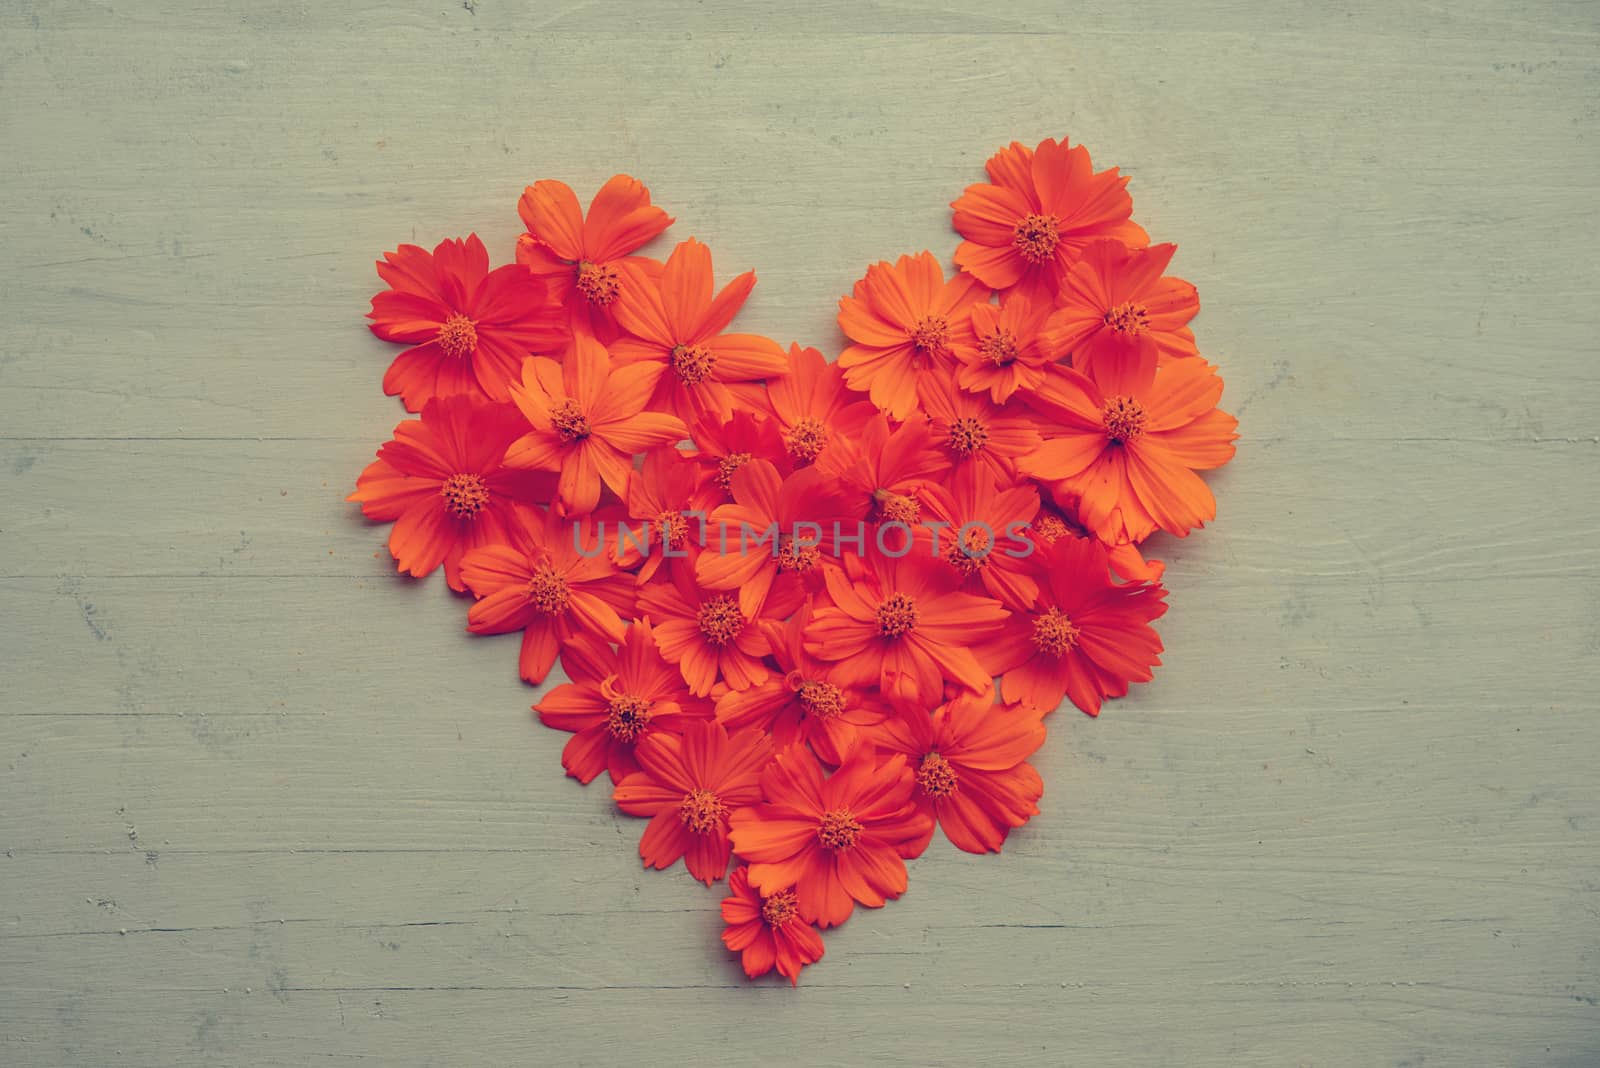 Orange cosmos flowers forming a heart shape on blue wooden background, de toned.